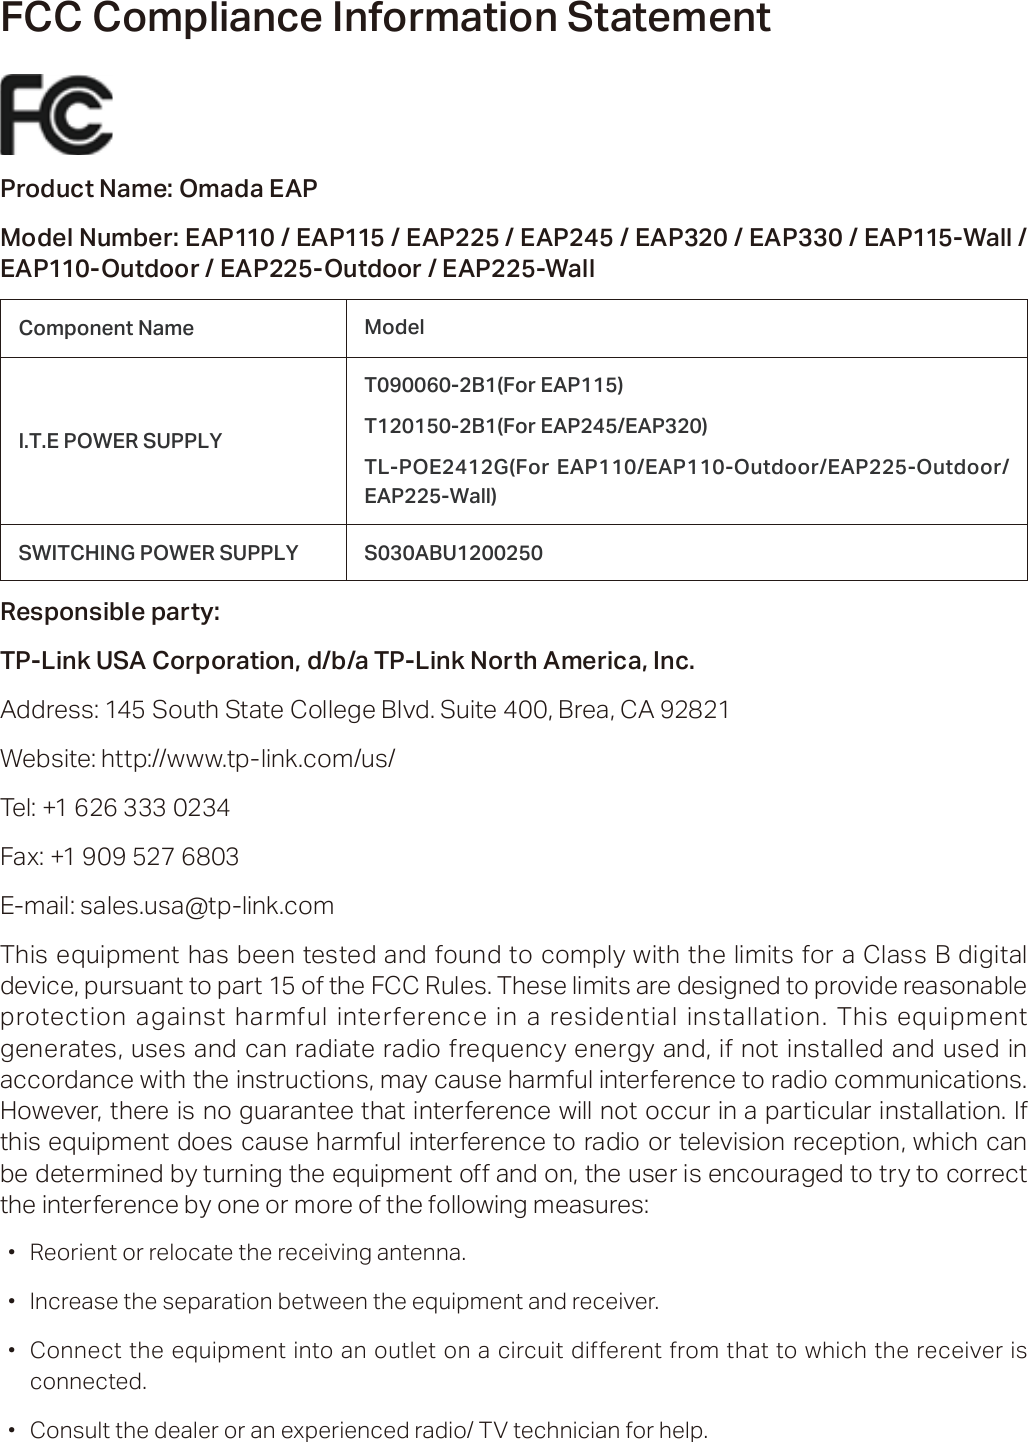 FCC Compliance Information StatementProduct Name: Omada EAPModel Number: EAP110 / EAP115 / EAP225 / EAP245 / EAP320 / EAP330 / EAP115-Wall / EAP110-Outdoor / EAP225-Outdoor / EAP225-WallComponent Name ModelI.T.E POWER SUPPLYT090060-2B1(For EAP115)T120150-2B1(For EAP245/EAP320)TL-POE2412G(For EAP110/EAP110-Outdoor/EAP225-Outdoor/ EAP225-Wall)SWITCHING POWER SUPPLY S030ABU1200250 Responsible party:TP-Link USA Corporation, d/b/a TP-Link North America, Inc.Address: 145 South State College Blvd. Suite 400, Brea, CA 92821Website: http://www.tp-link.com/us/Tel: +1 626 333 0234Fax: +1 909 527 6803E-mail: sales.usa@tp-link.comThis equipment has been tested and found to comply with the limits for a Class B digital device, pursuant to part 15 of the FCC Rules. These limits are designed to provide reasonable protection against harmful interference in a residential installation. This equipment generates, uses and can radiate radio frequency energy and, if not installed and used in accordance with the instructions, may cause harmful interference to radio communications. However, there is no guarantee that interference will not occur in a particular installation. If this equipment does cause harmful interference to radio or television reception, which can be determined by turning the equipment off and on, the user is encouraged to try to correct the interference by one or more of the following measures: ·Reorient or relocate the receiving antenna. ·Increase the separation between the equipment and receiver. ·Connect the equipment into an outlet on a circuit different from that to which the receiver is connected. ·Consult the dealer or an experienced radio/ TV technician for help.